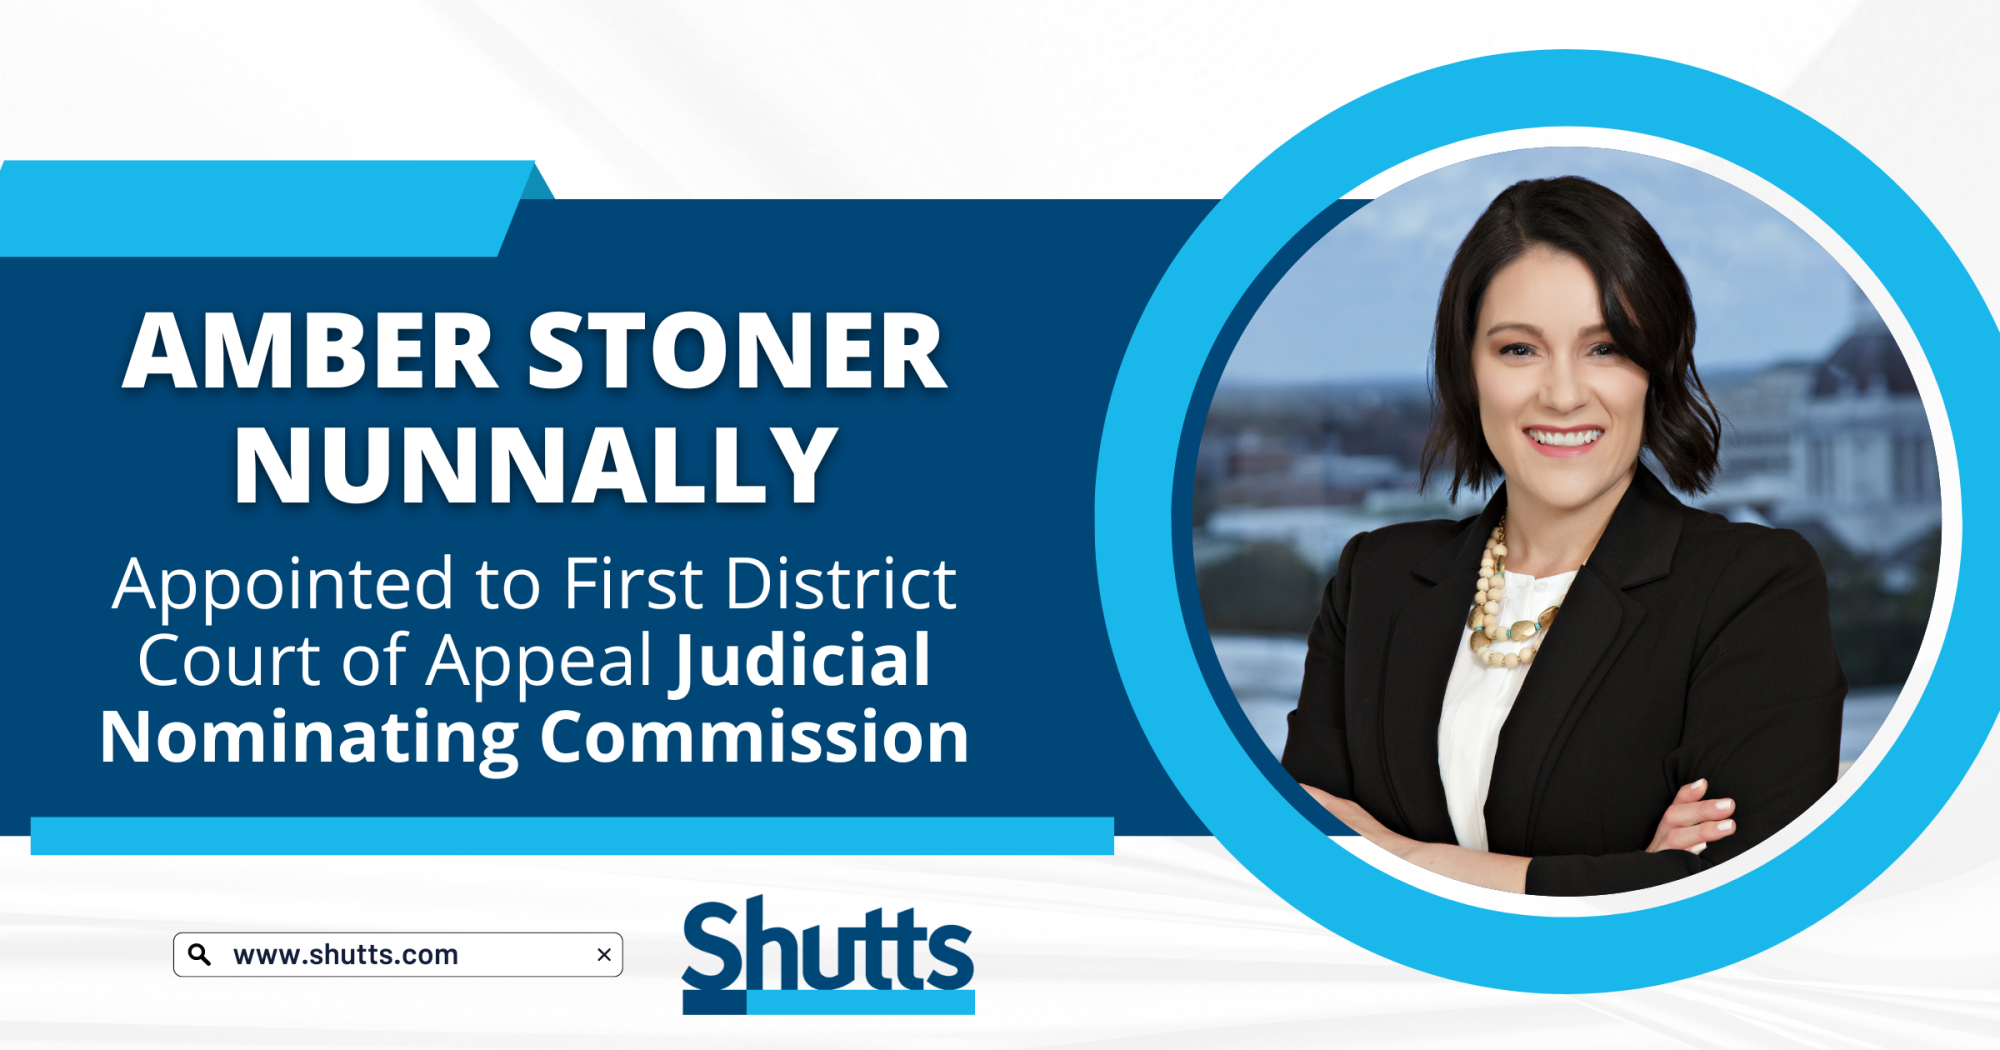 Amber Stoner Nunnally Appointed to First District Court of Appeal Judicial Nominating Commission